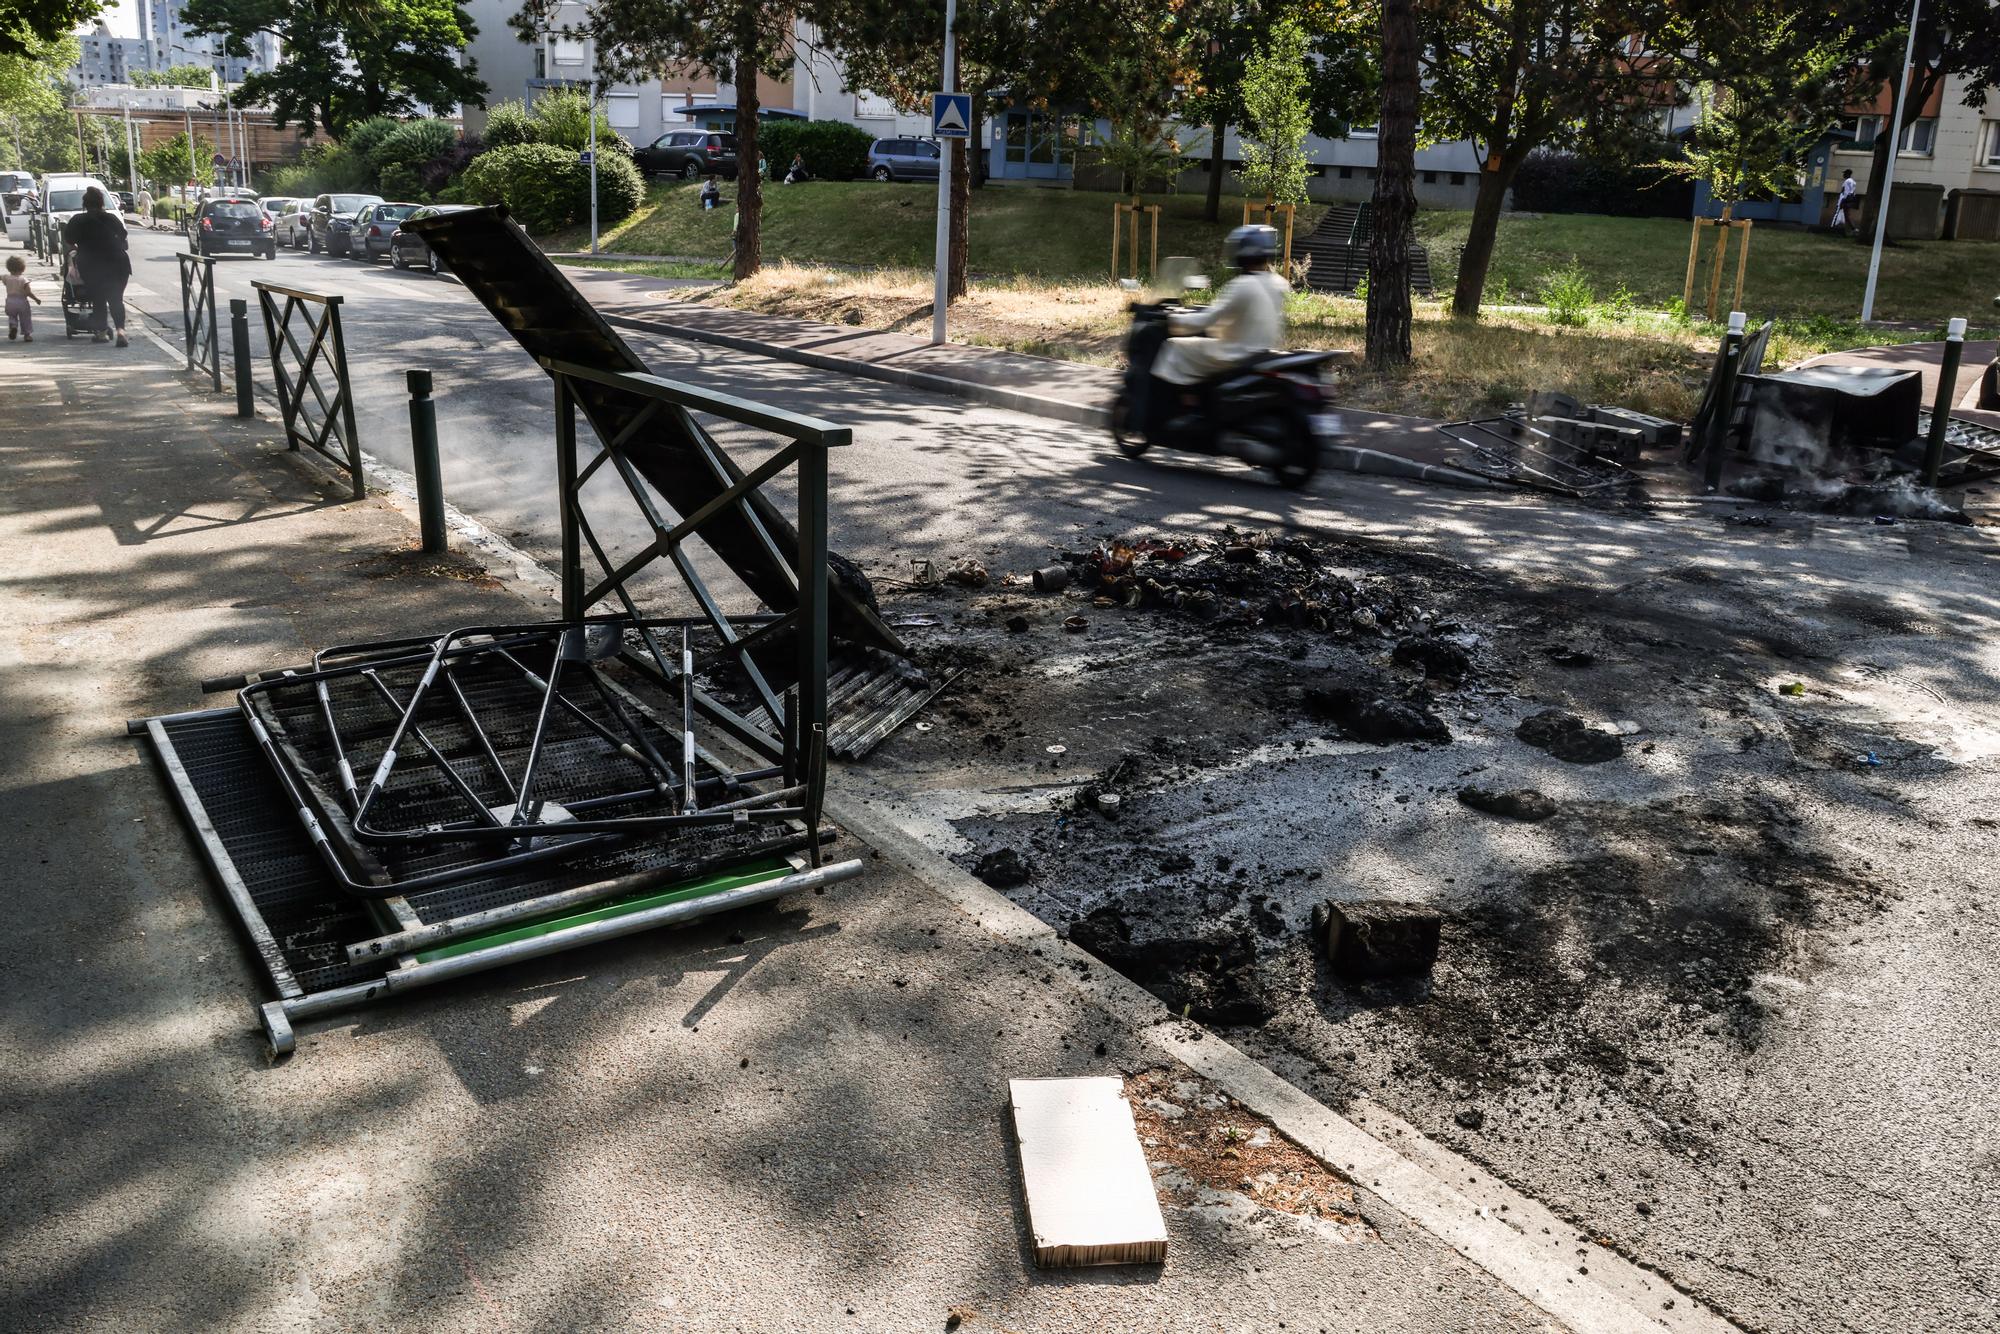 Clean up in Nanterre after riots over teenager fatally shot by police